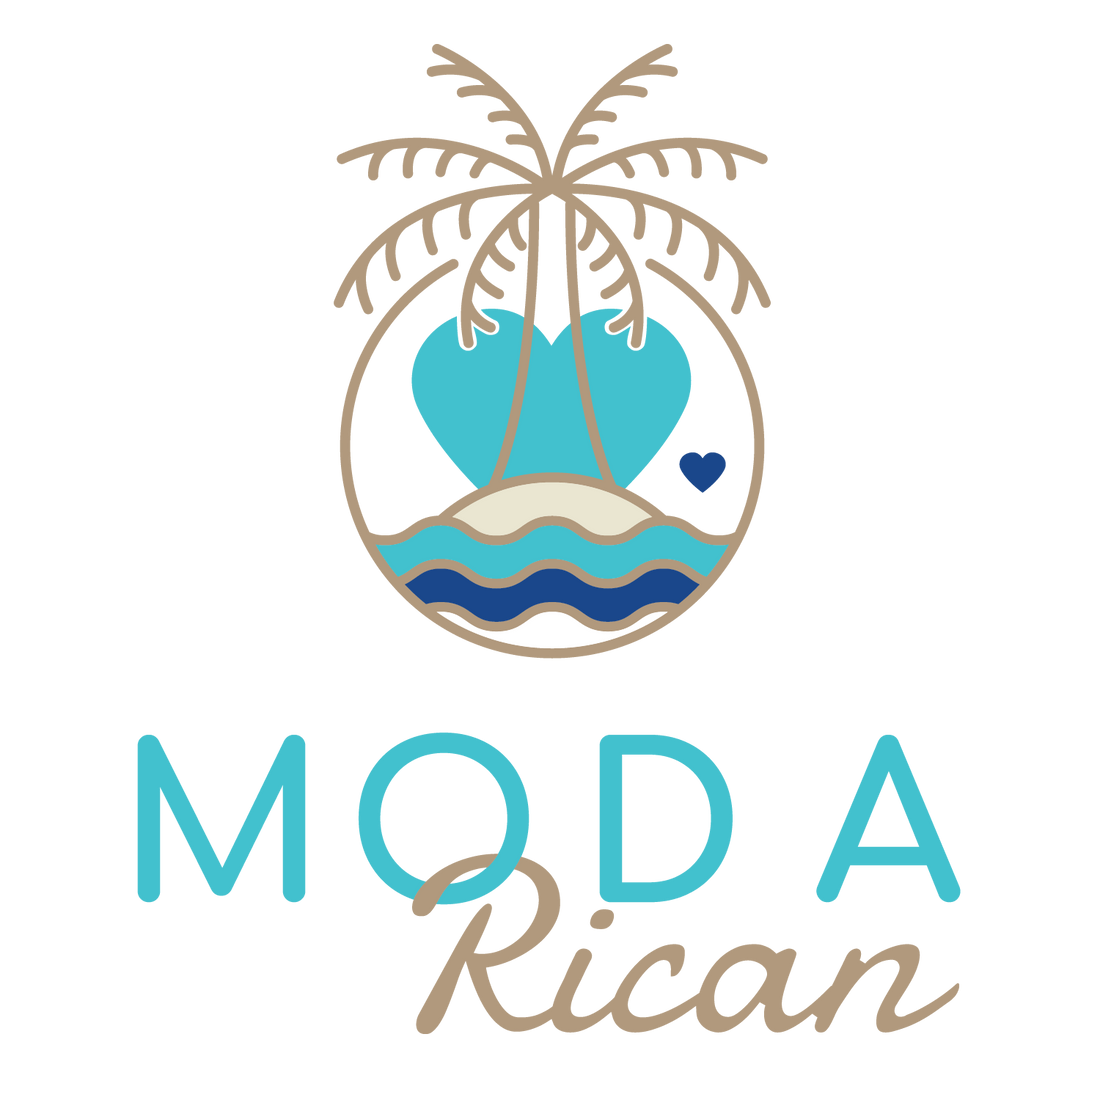 Moda Rican, from Dream to Reality!